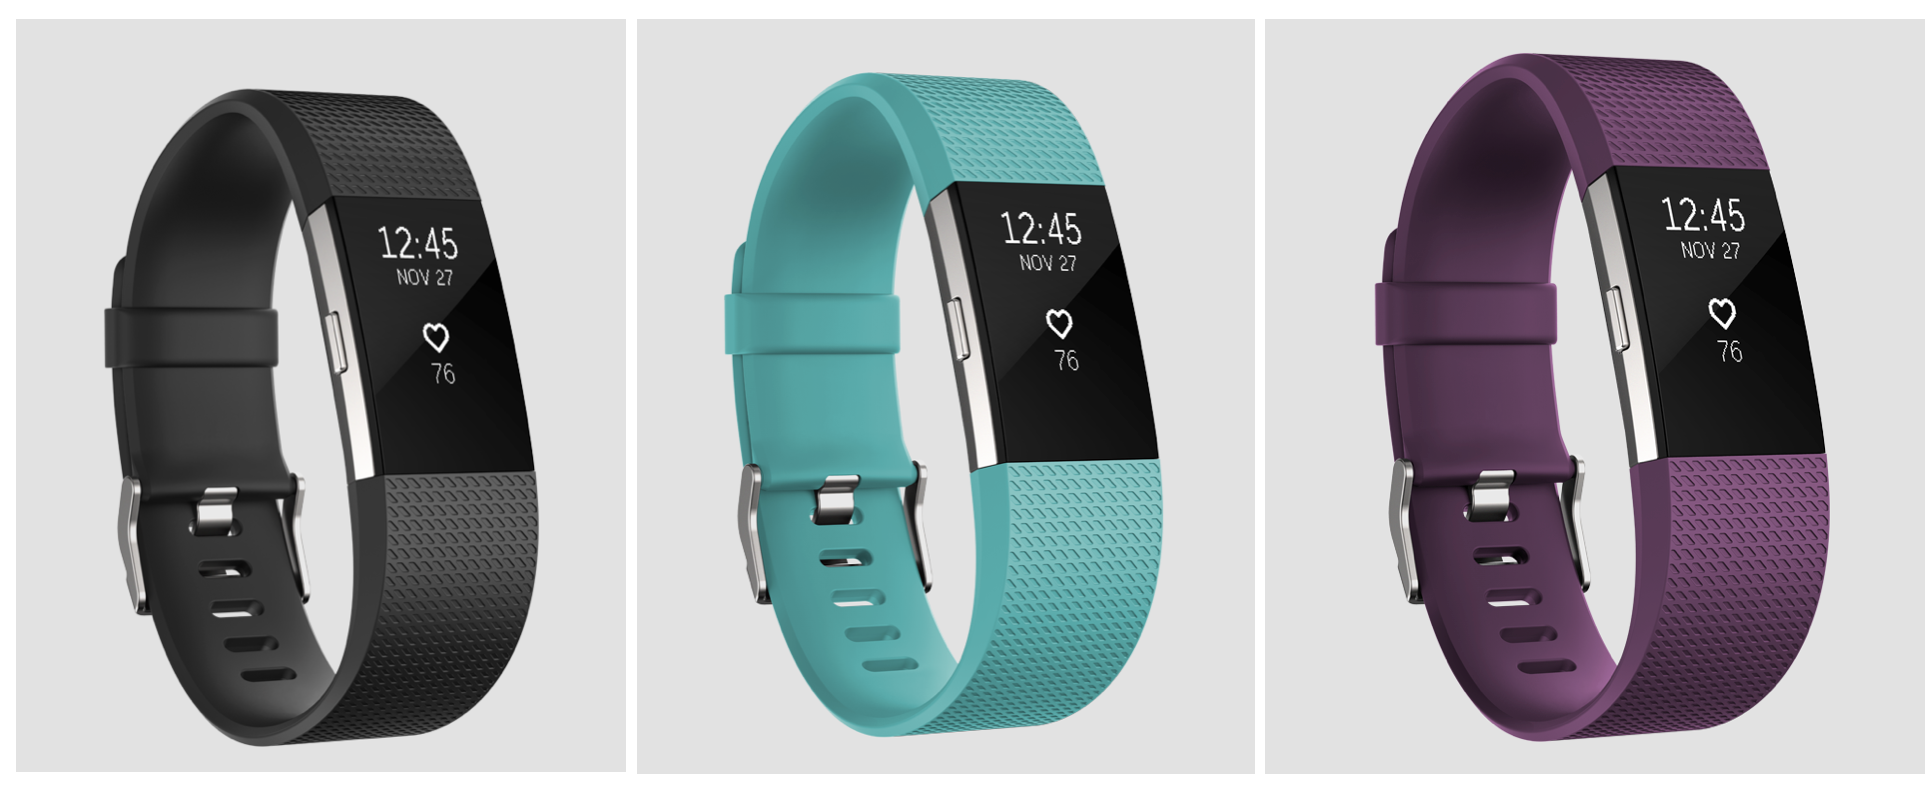 FitBit Charge 2 HR Wristband only $75 